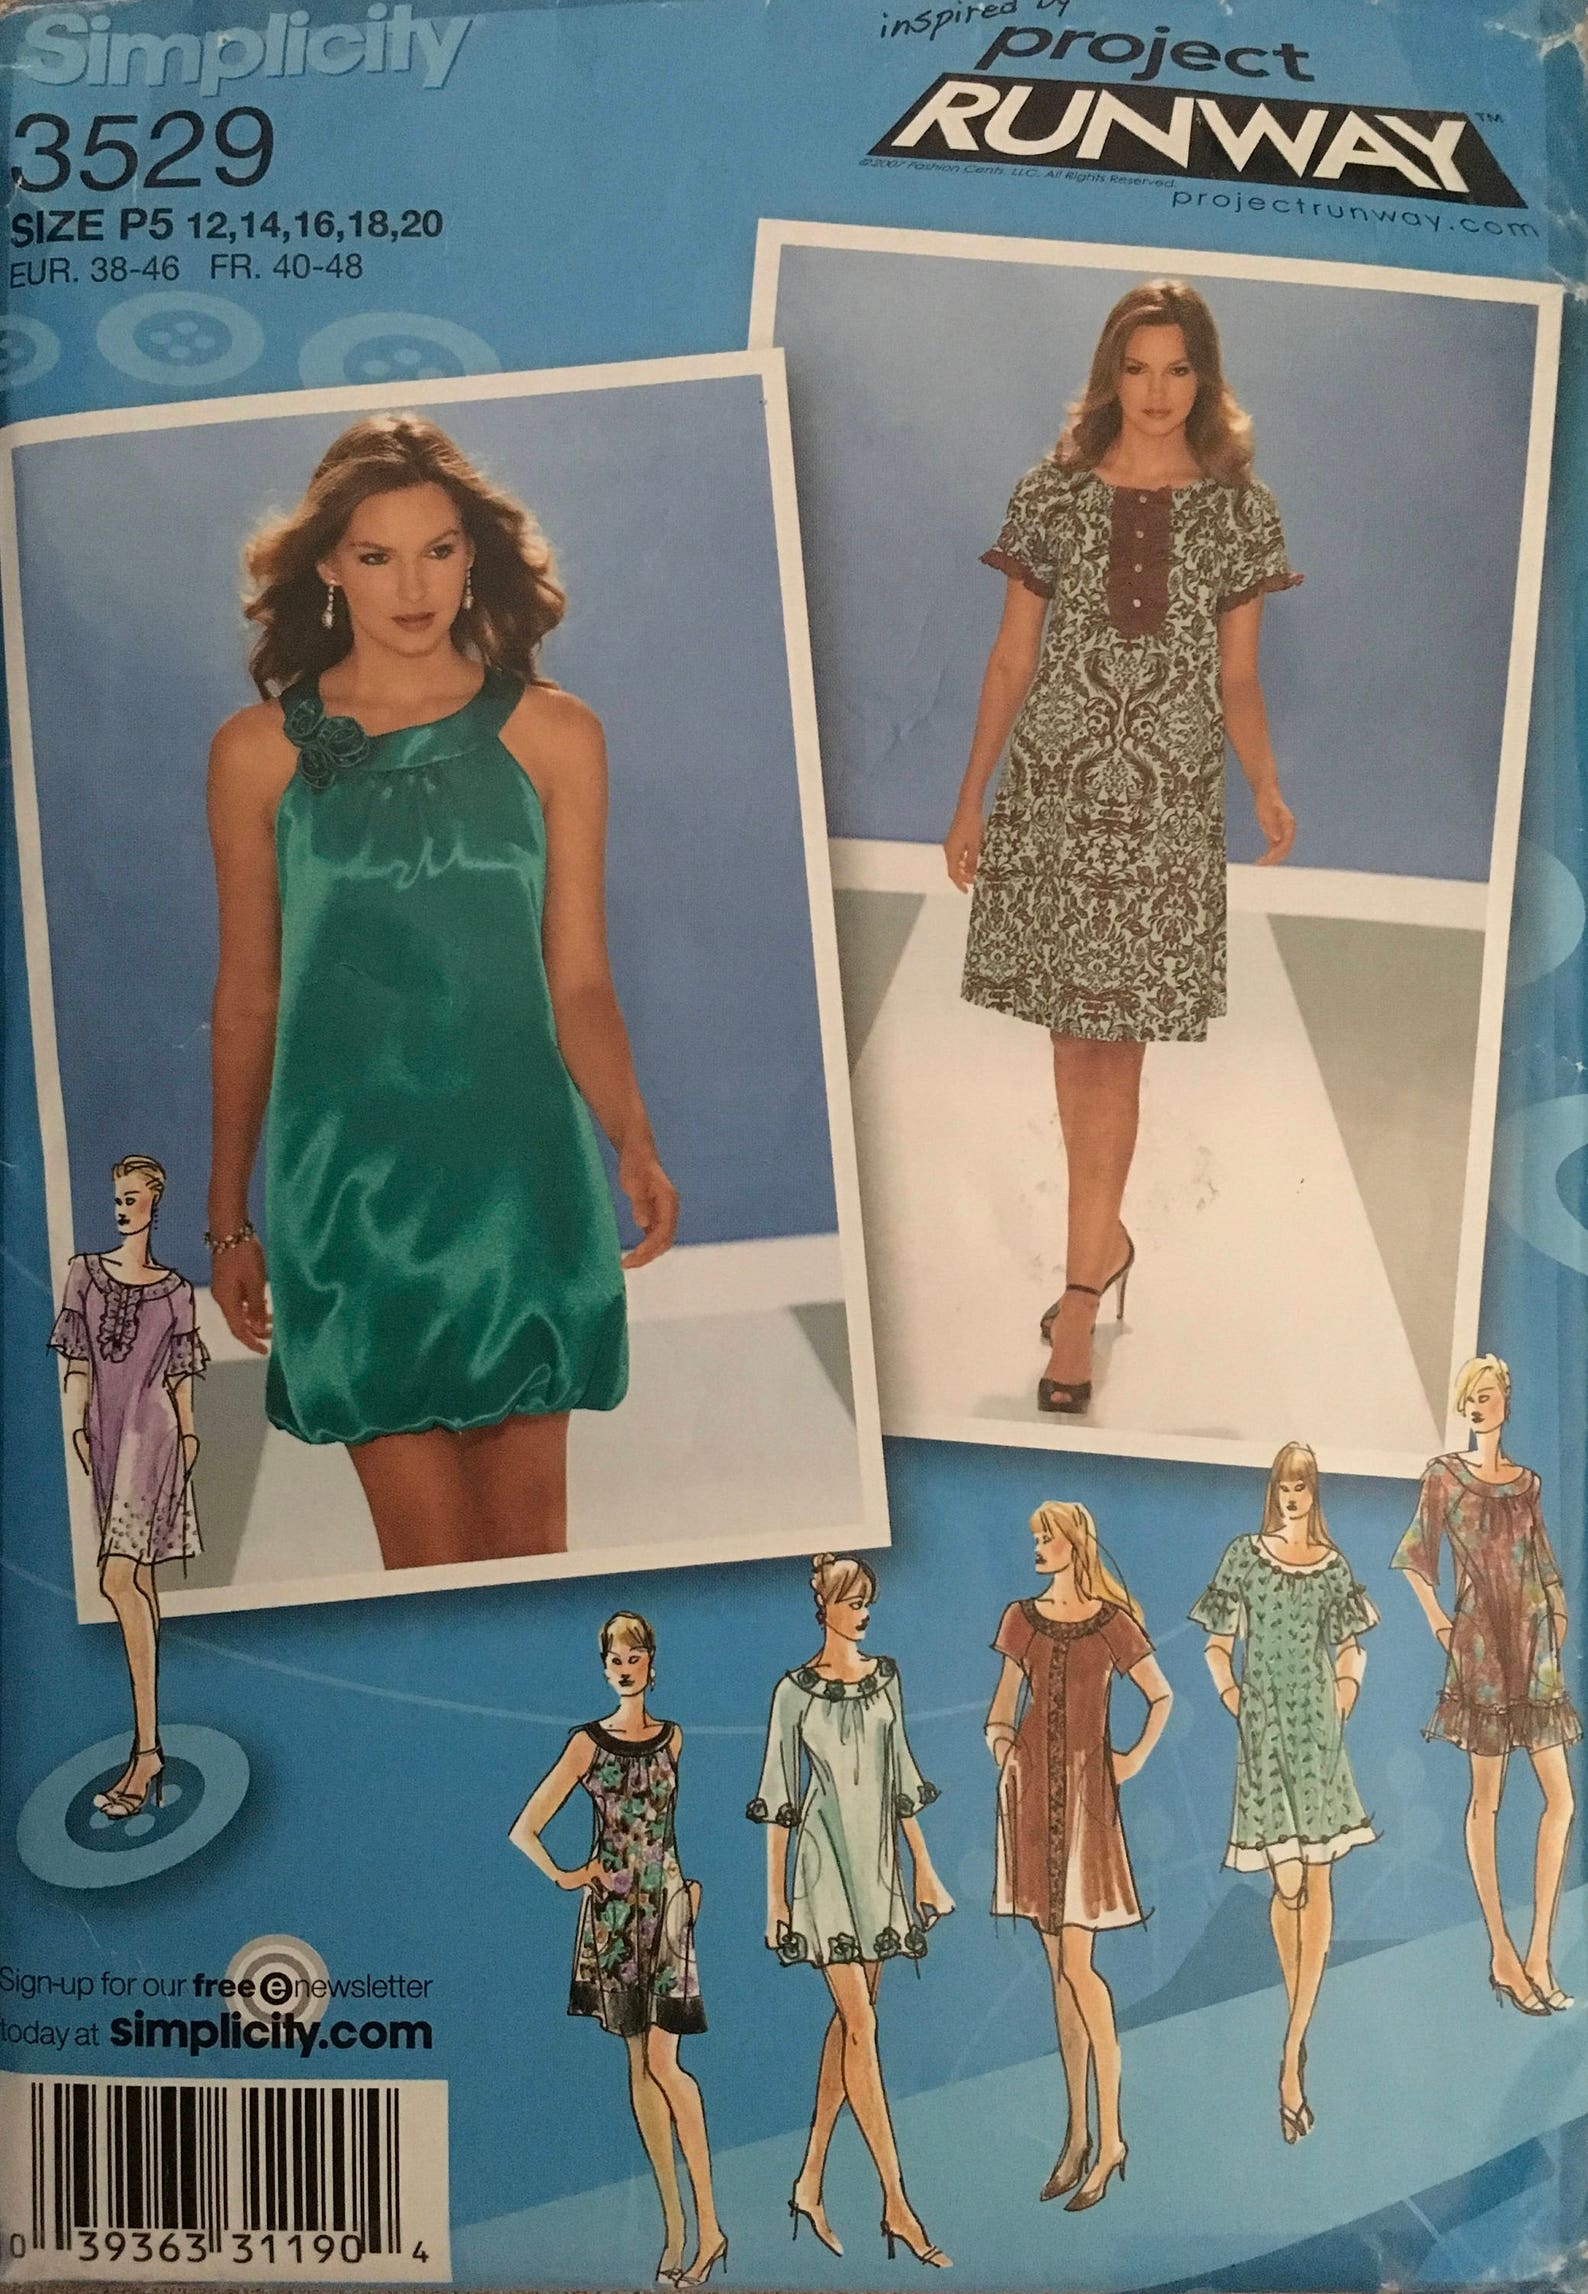 Simplicity 3529 Sewing Pattern UNCUT | Etsy